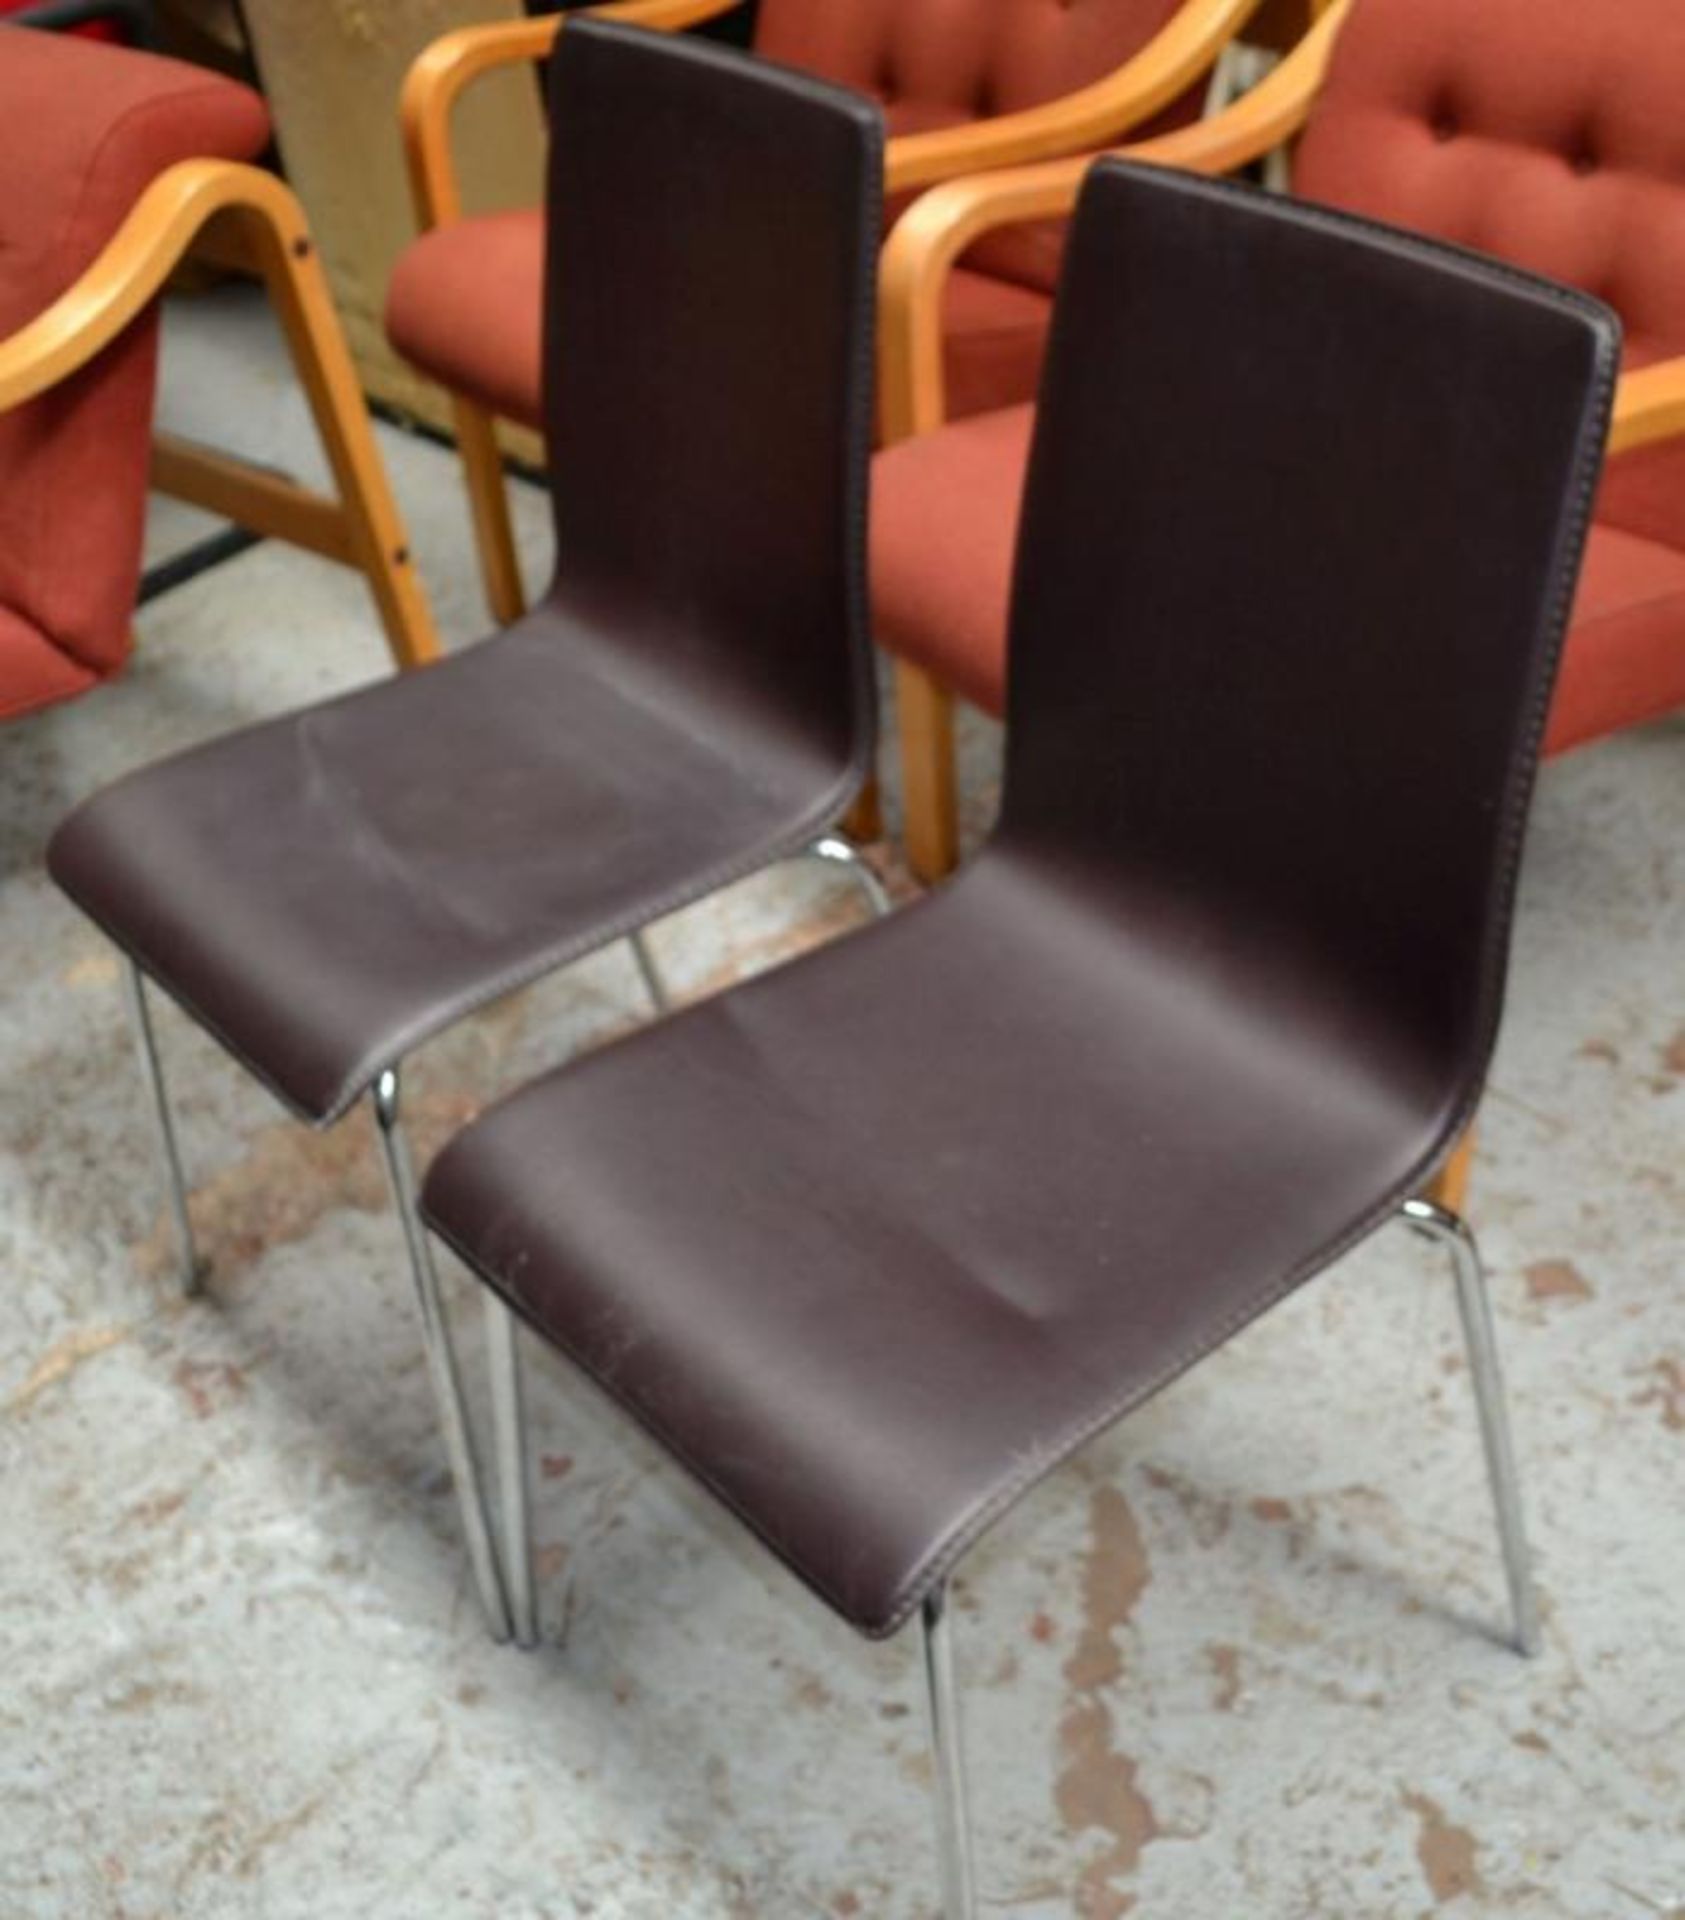 2 x Faux Leather Dining Chairs - Brown with Chrome Legs - H85 x W41 x D44cm - Ref: MWI018 - - Image 6 of 6